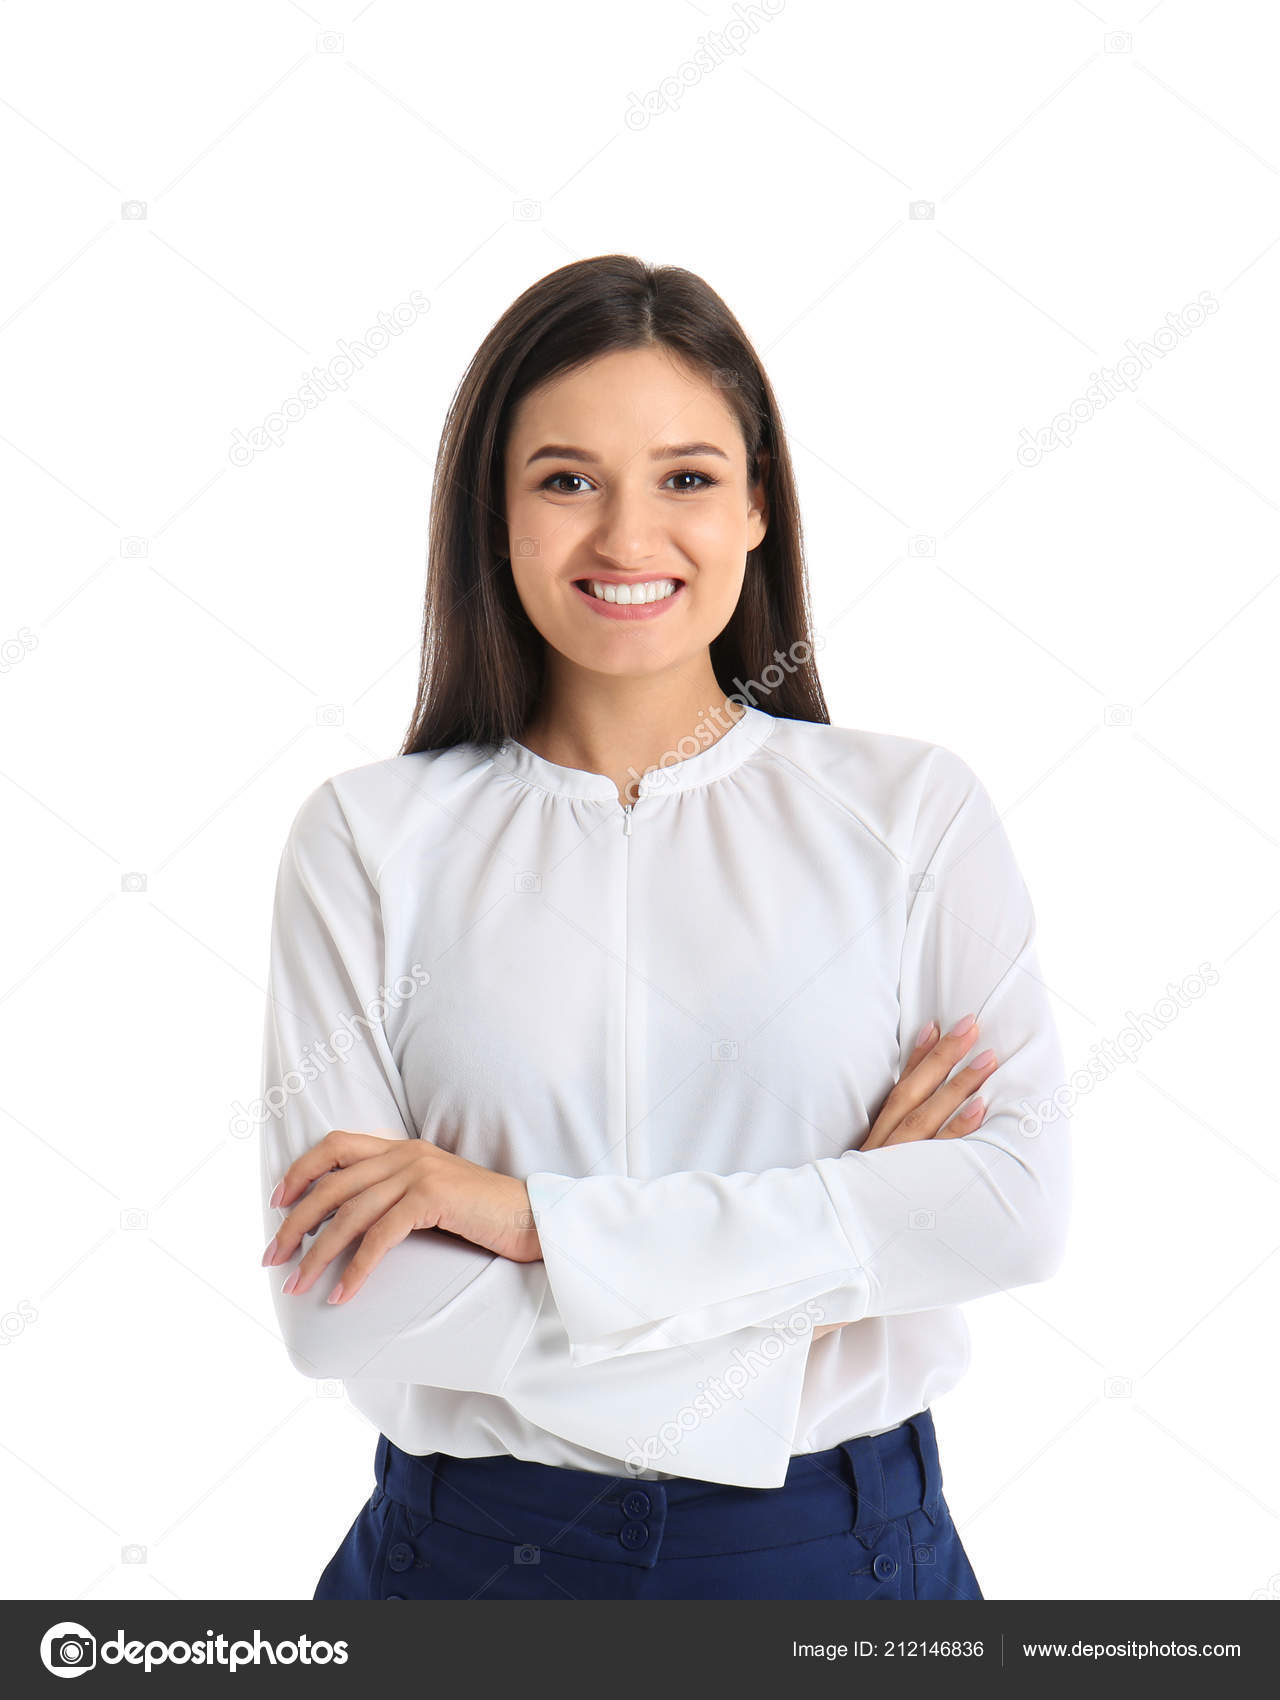 Young adult woman in formal clothes is indoors against grey background  15408490 Stock Photo at Vecteezy